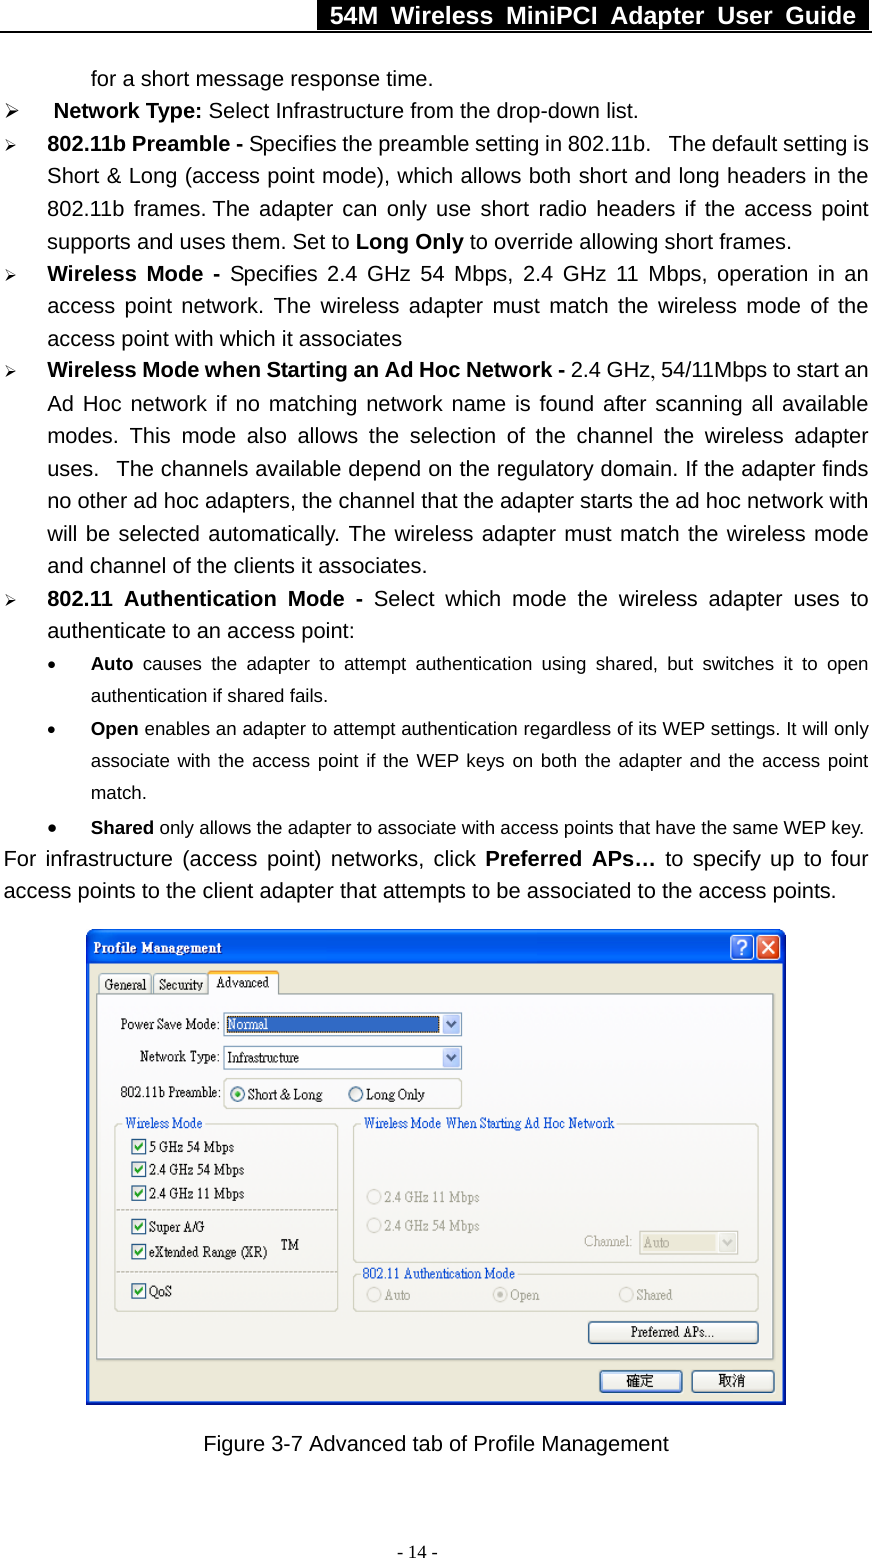   54M Wireless MiniPCI Adapter User Guide  - 14 - for a short message response time. ¾ Network Type: Select Infrastructure from the drop-down list.    ¾ 802.11b Preamble - Specifies the preamble setting in 802.11b.   The default setting is Short &amp; Long (access point mode), which allows both short and long headers in the 802.11b frames. The adapter can only use short radio headers if the access point supports and uses them. Set to Long Only to override allowing short frames. ¾ Wireless Mode - Specifies 2.4 GHz 54 Mbps, 2.4 GHz 11 Mbps, operation in an access point network. The wireless adapter must match the wireless mode of the access point with which it associates ¾ Wireless Mode when Starting an Ad Hoc Network - 2.4 GHz, 54/11Mbps to start an Ad Hoc network if no matching network name is found after scanning all available modes. This mode also allows the selection of the channel the wireless adapter uses.   The channels available depend on the regulatory domain. If the adapter finds no other ad hoc adapters, the channel that the adapter starts the ad hoc network with will be selected automatically. The wireless adapter must match the wireless mode and channel of the clients it associates. ¾ 802.11 Authentication Mode - Select which mode the wireless adapter uses to authenticate to an access point: • Auto causes the adapter to attempt authentication using shared, but switches it to open authentication if shared fails. • Open enables an adapter to attempt authentication regardless of its WEP settings. It will only associate with the access point if the WEP keys on both the adapter and the access point match. • Shared only allows the adapter to associate with access points that have the same WEP key. For infrastructure (access point) networks, click Preferred APs… to specify up to four access points to the client adapter that attempts to be associated to the access points.  Figure 3-7 Advanced tab of Profile Management 